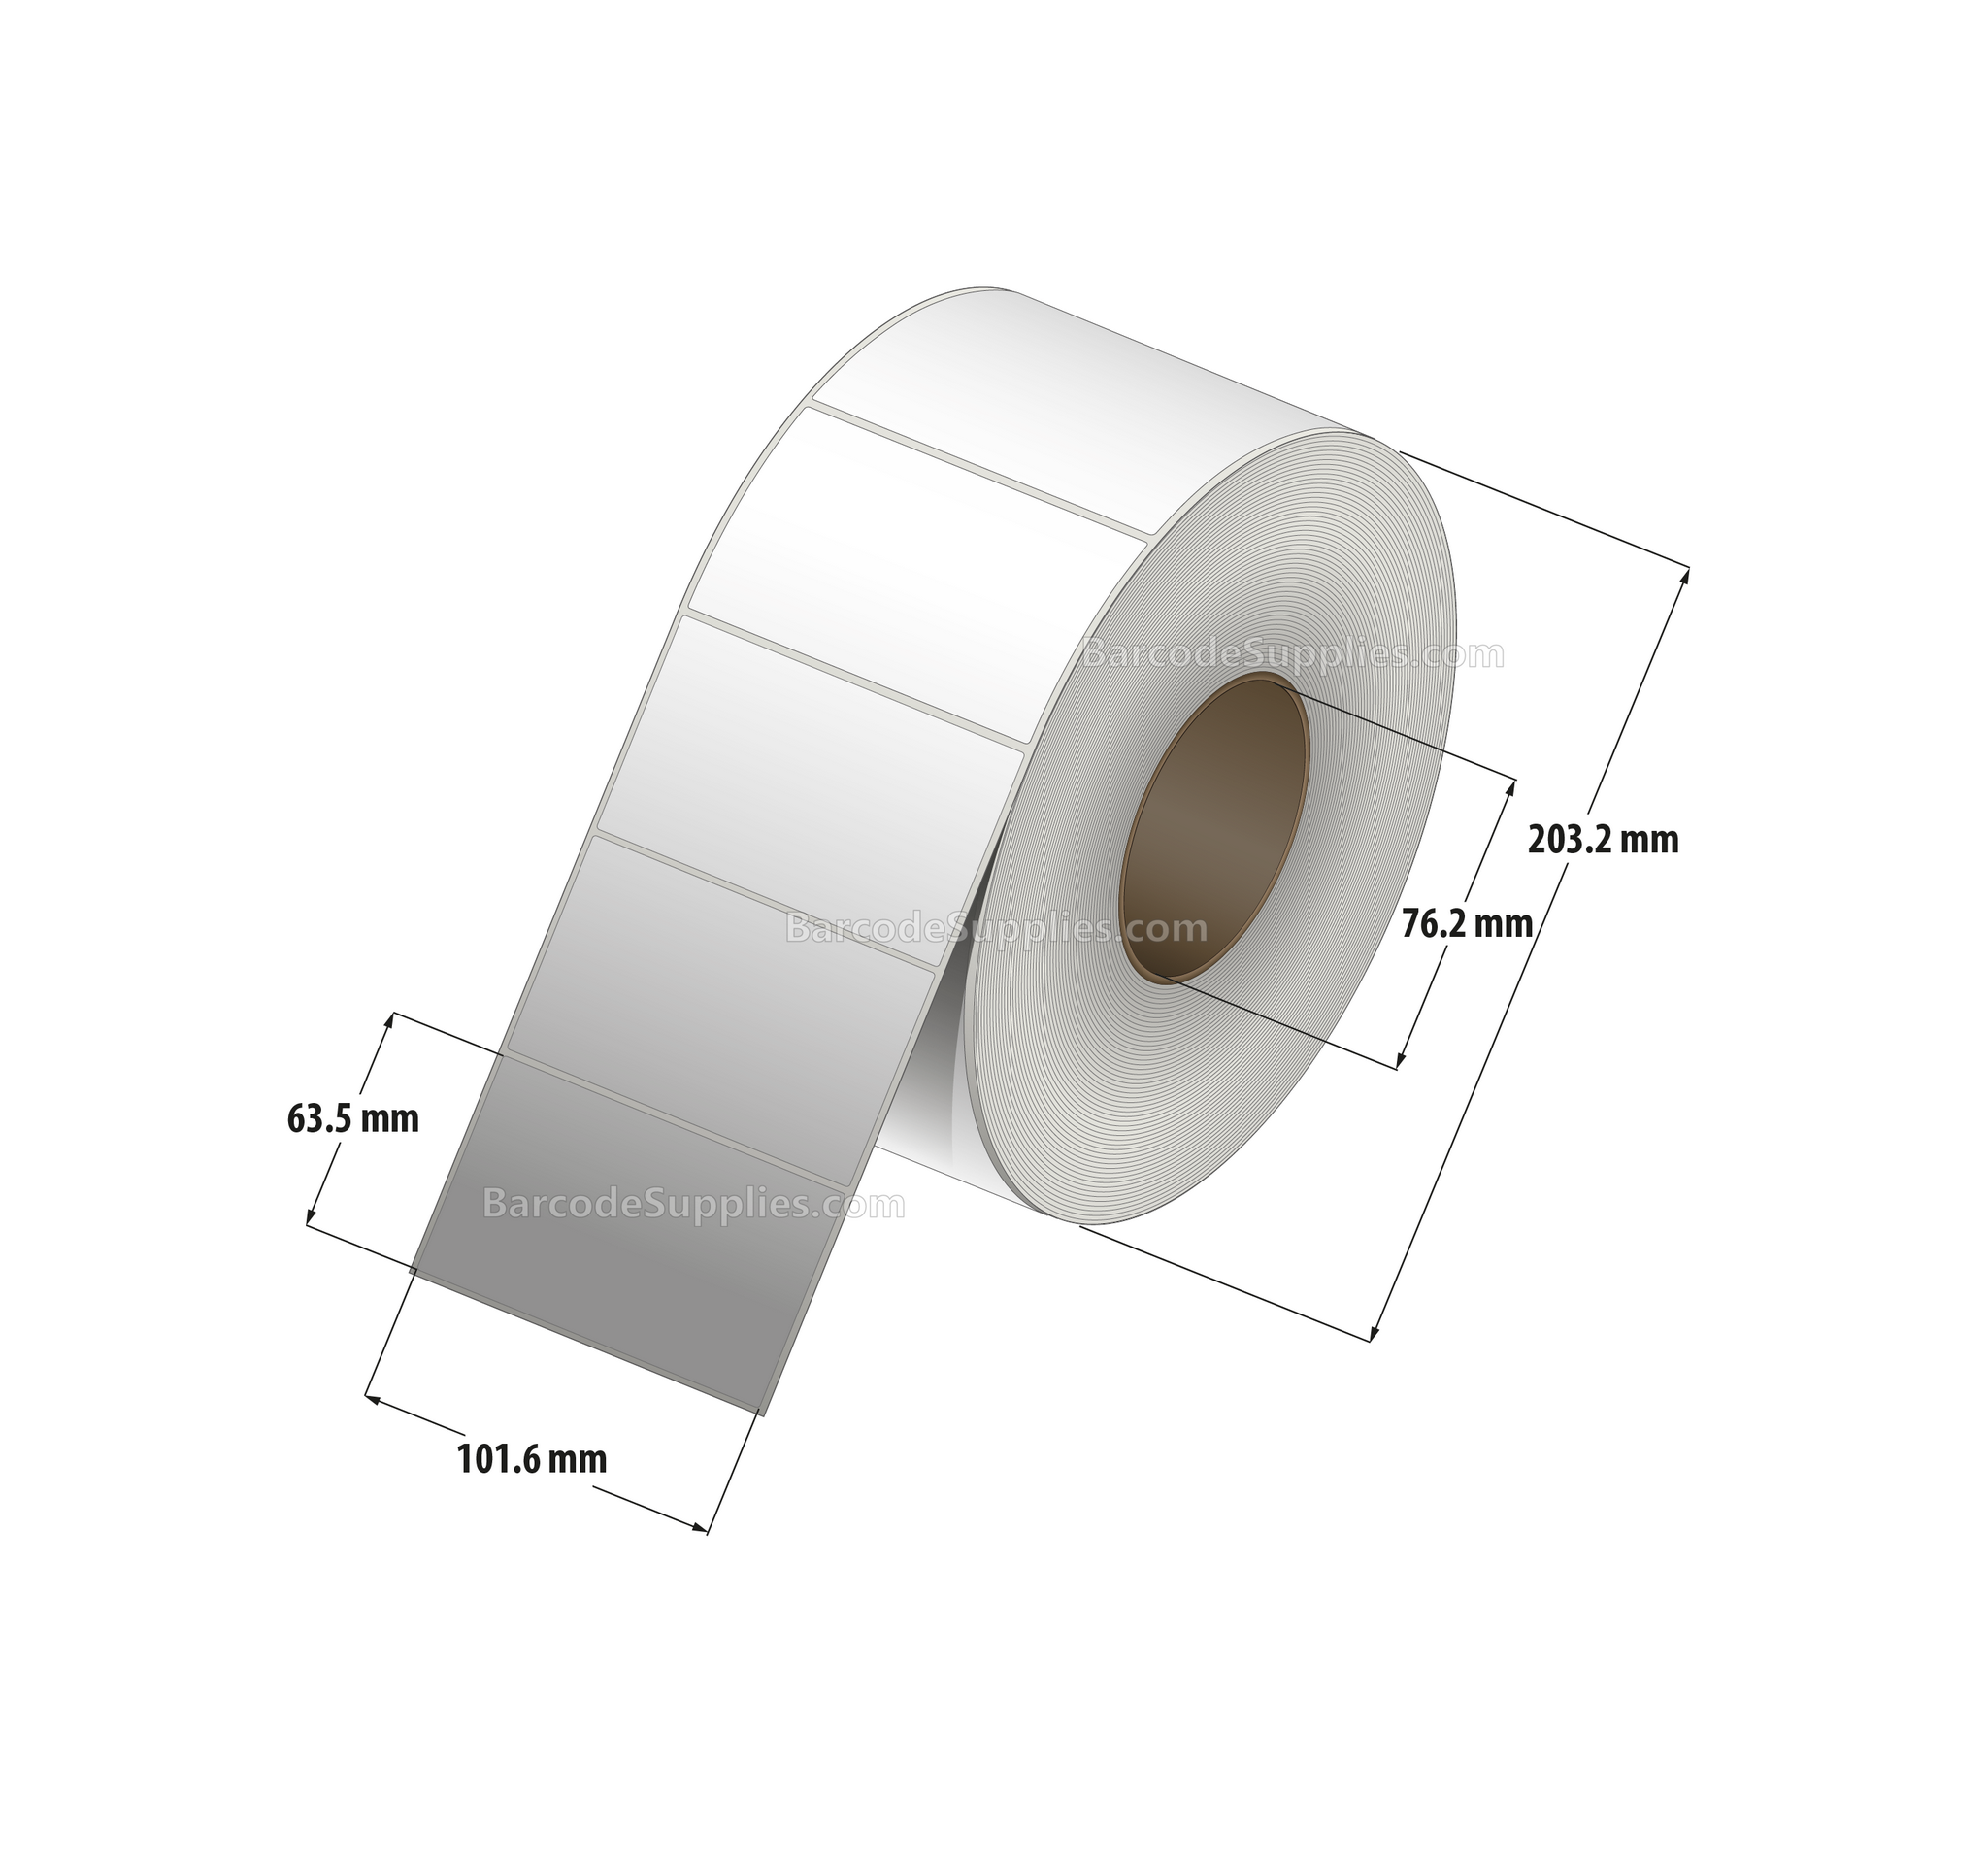 4 x 2.5 Thermal Transfer White Labels With Permanent Acrylic Adhesive - Not Perforated - 2500 Labels Per Roll - Carton Of 4 Rolls - 10000 Labels Total - MPN: TH425-1